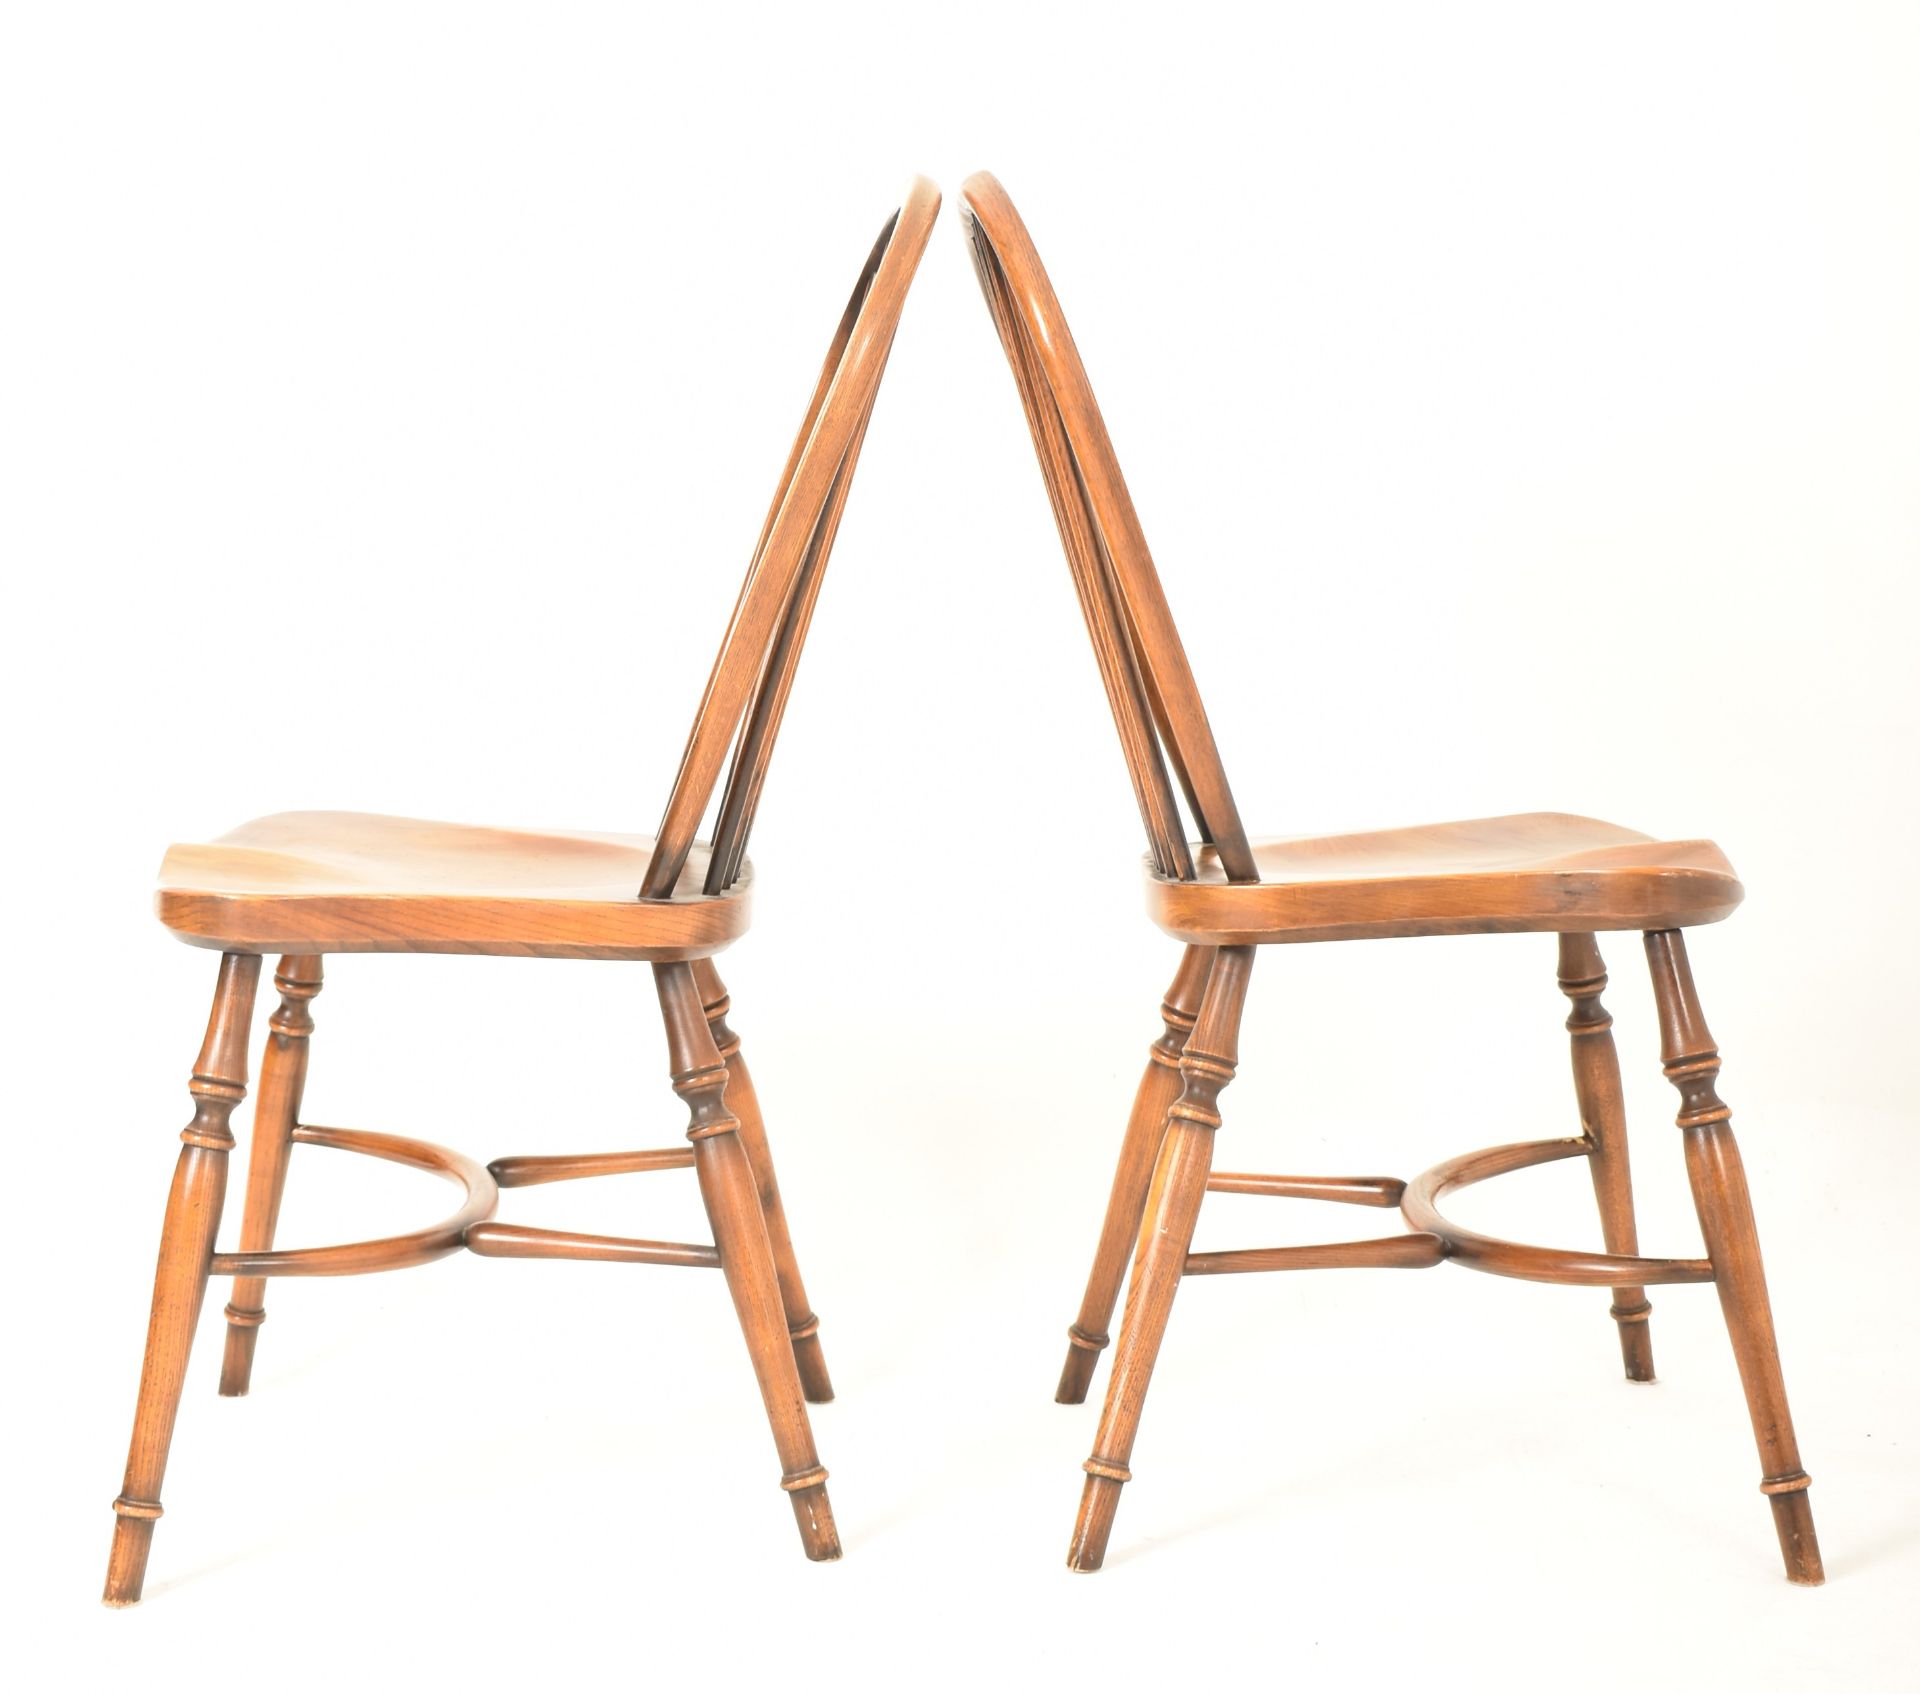 STEWART LINFORD FURNITURE - SIX WINDSOR STYLE STICK BACK CHAIRS - Image 6 of 8